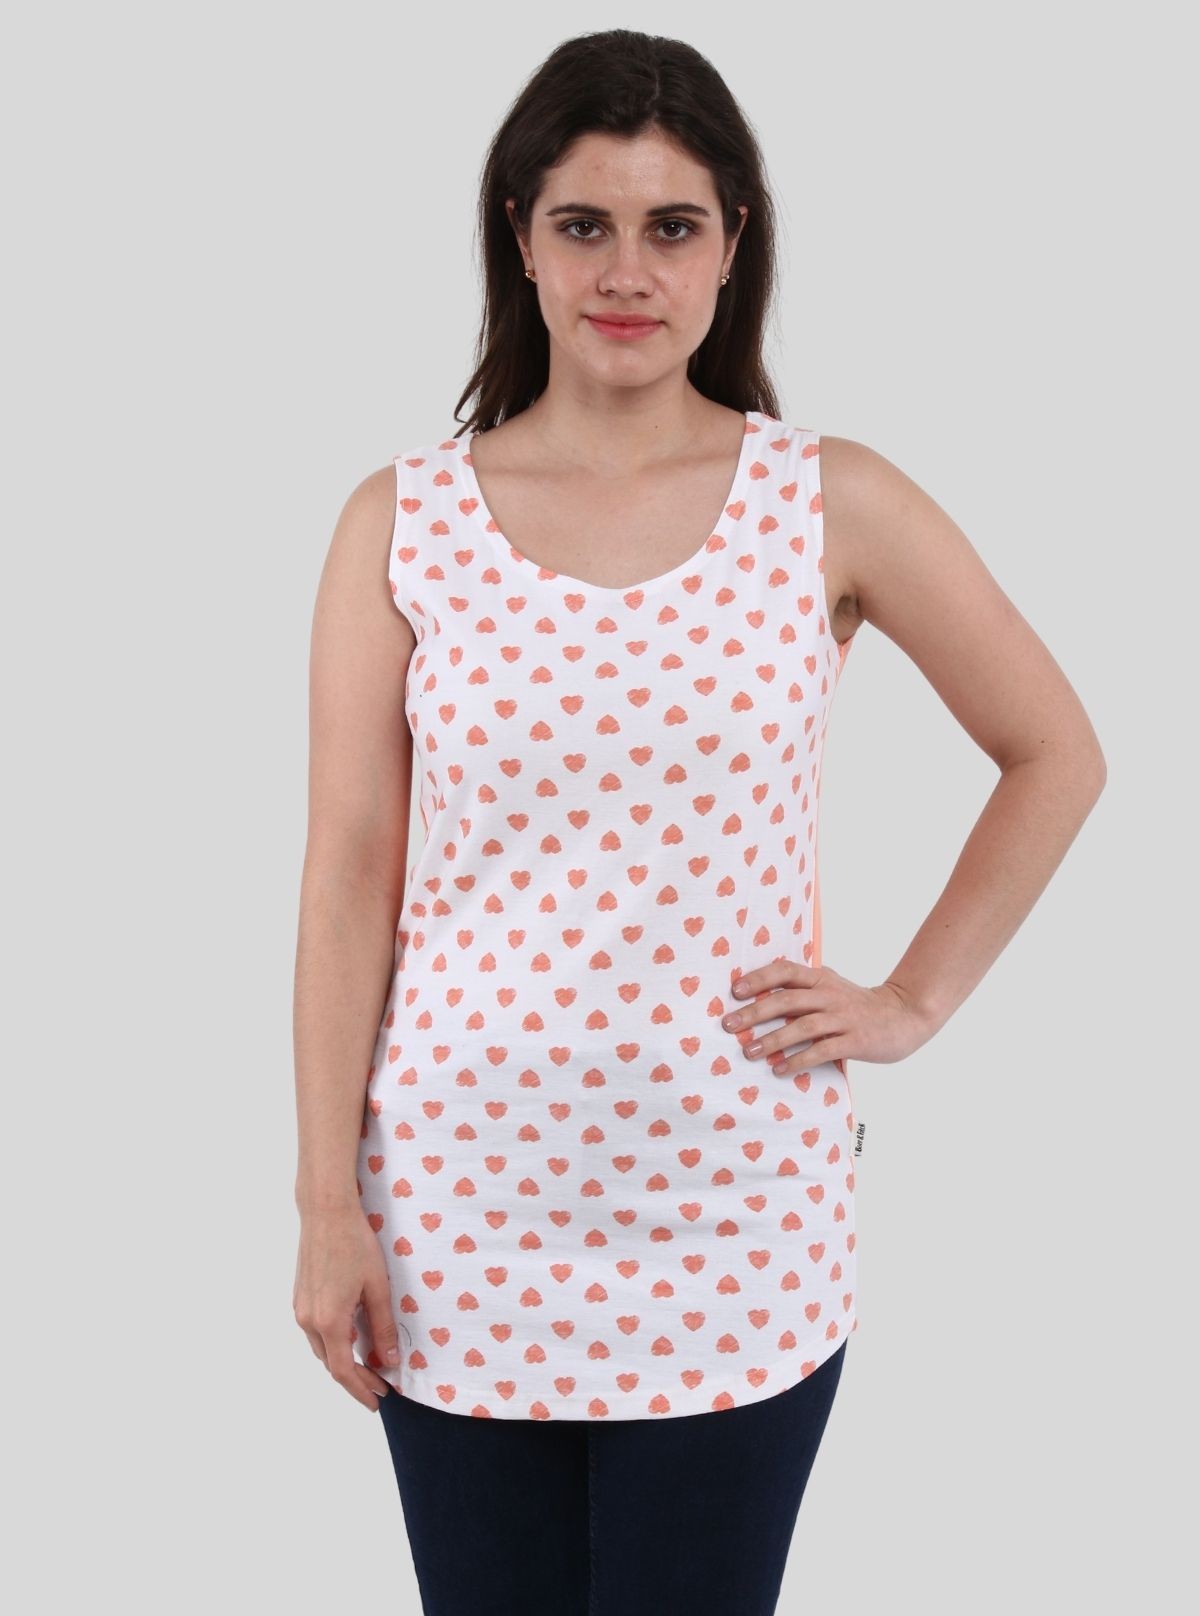 Heart Graphic Print Top